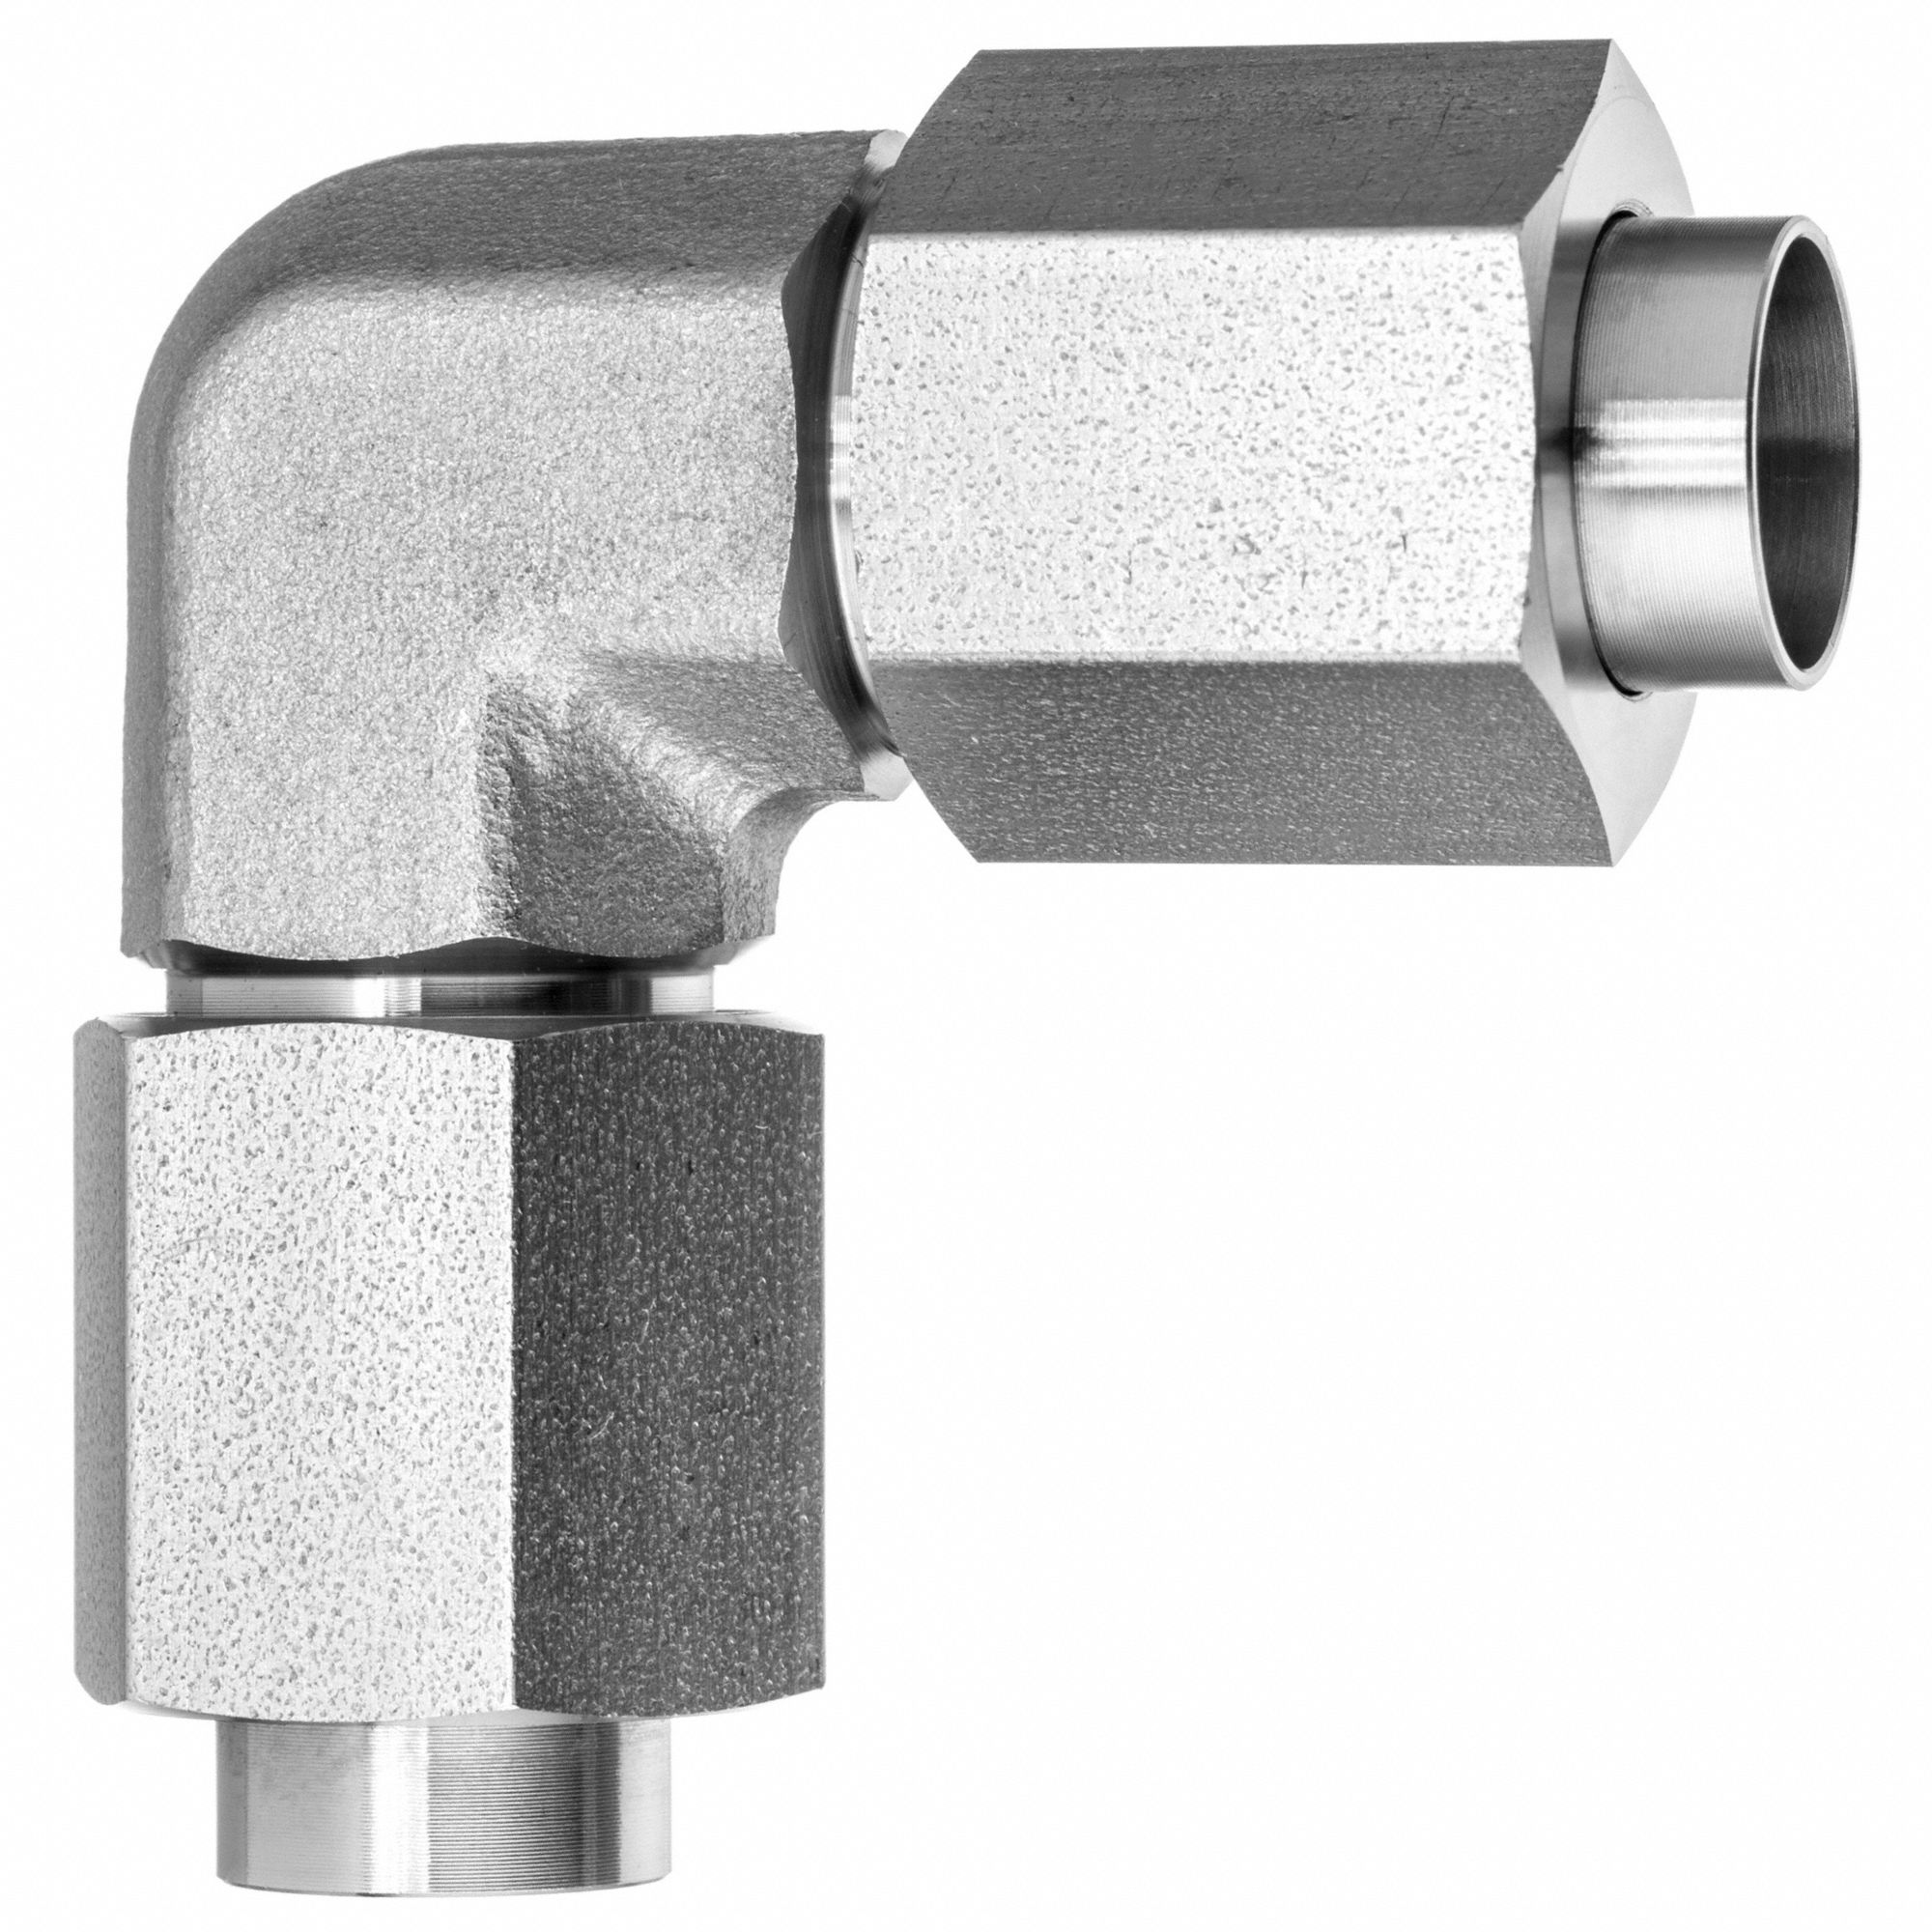 USA SEALING 90-DEGREE UNION ELBOW, TUBE, 4900 PSI, ZINC-PLATED STEEL -  Compression Tube Fittings - USSZUSATFCFST99